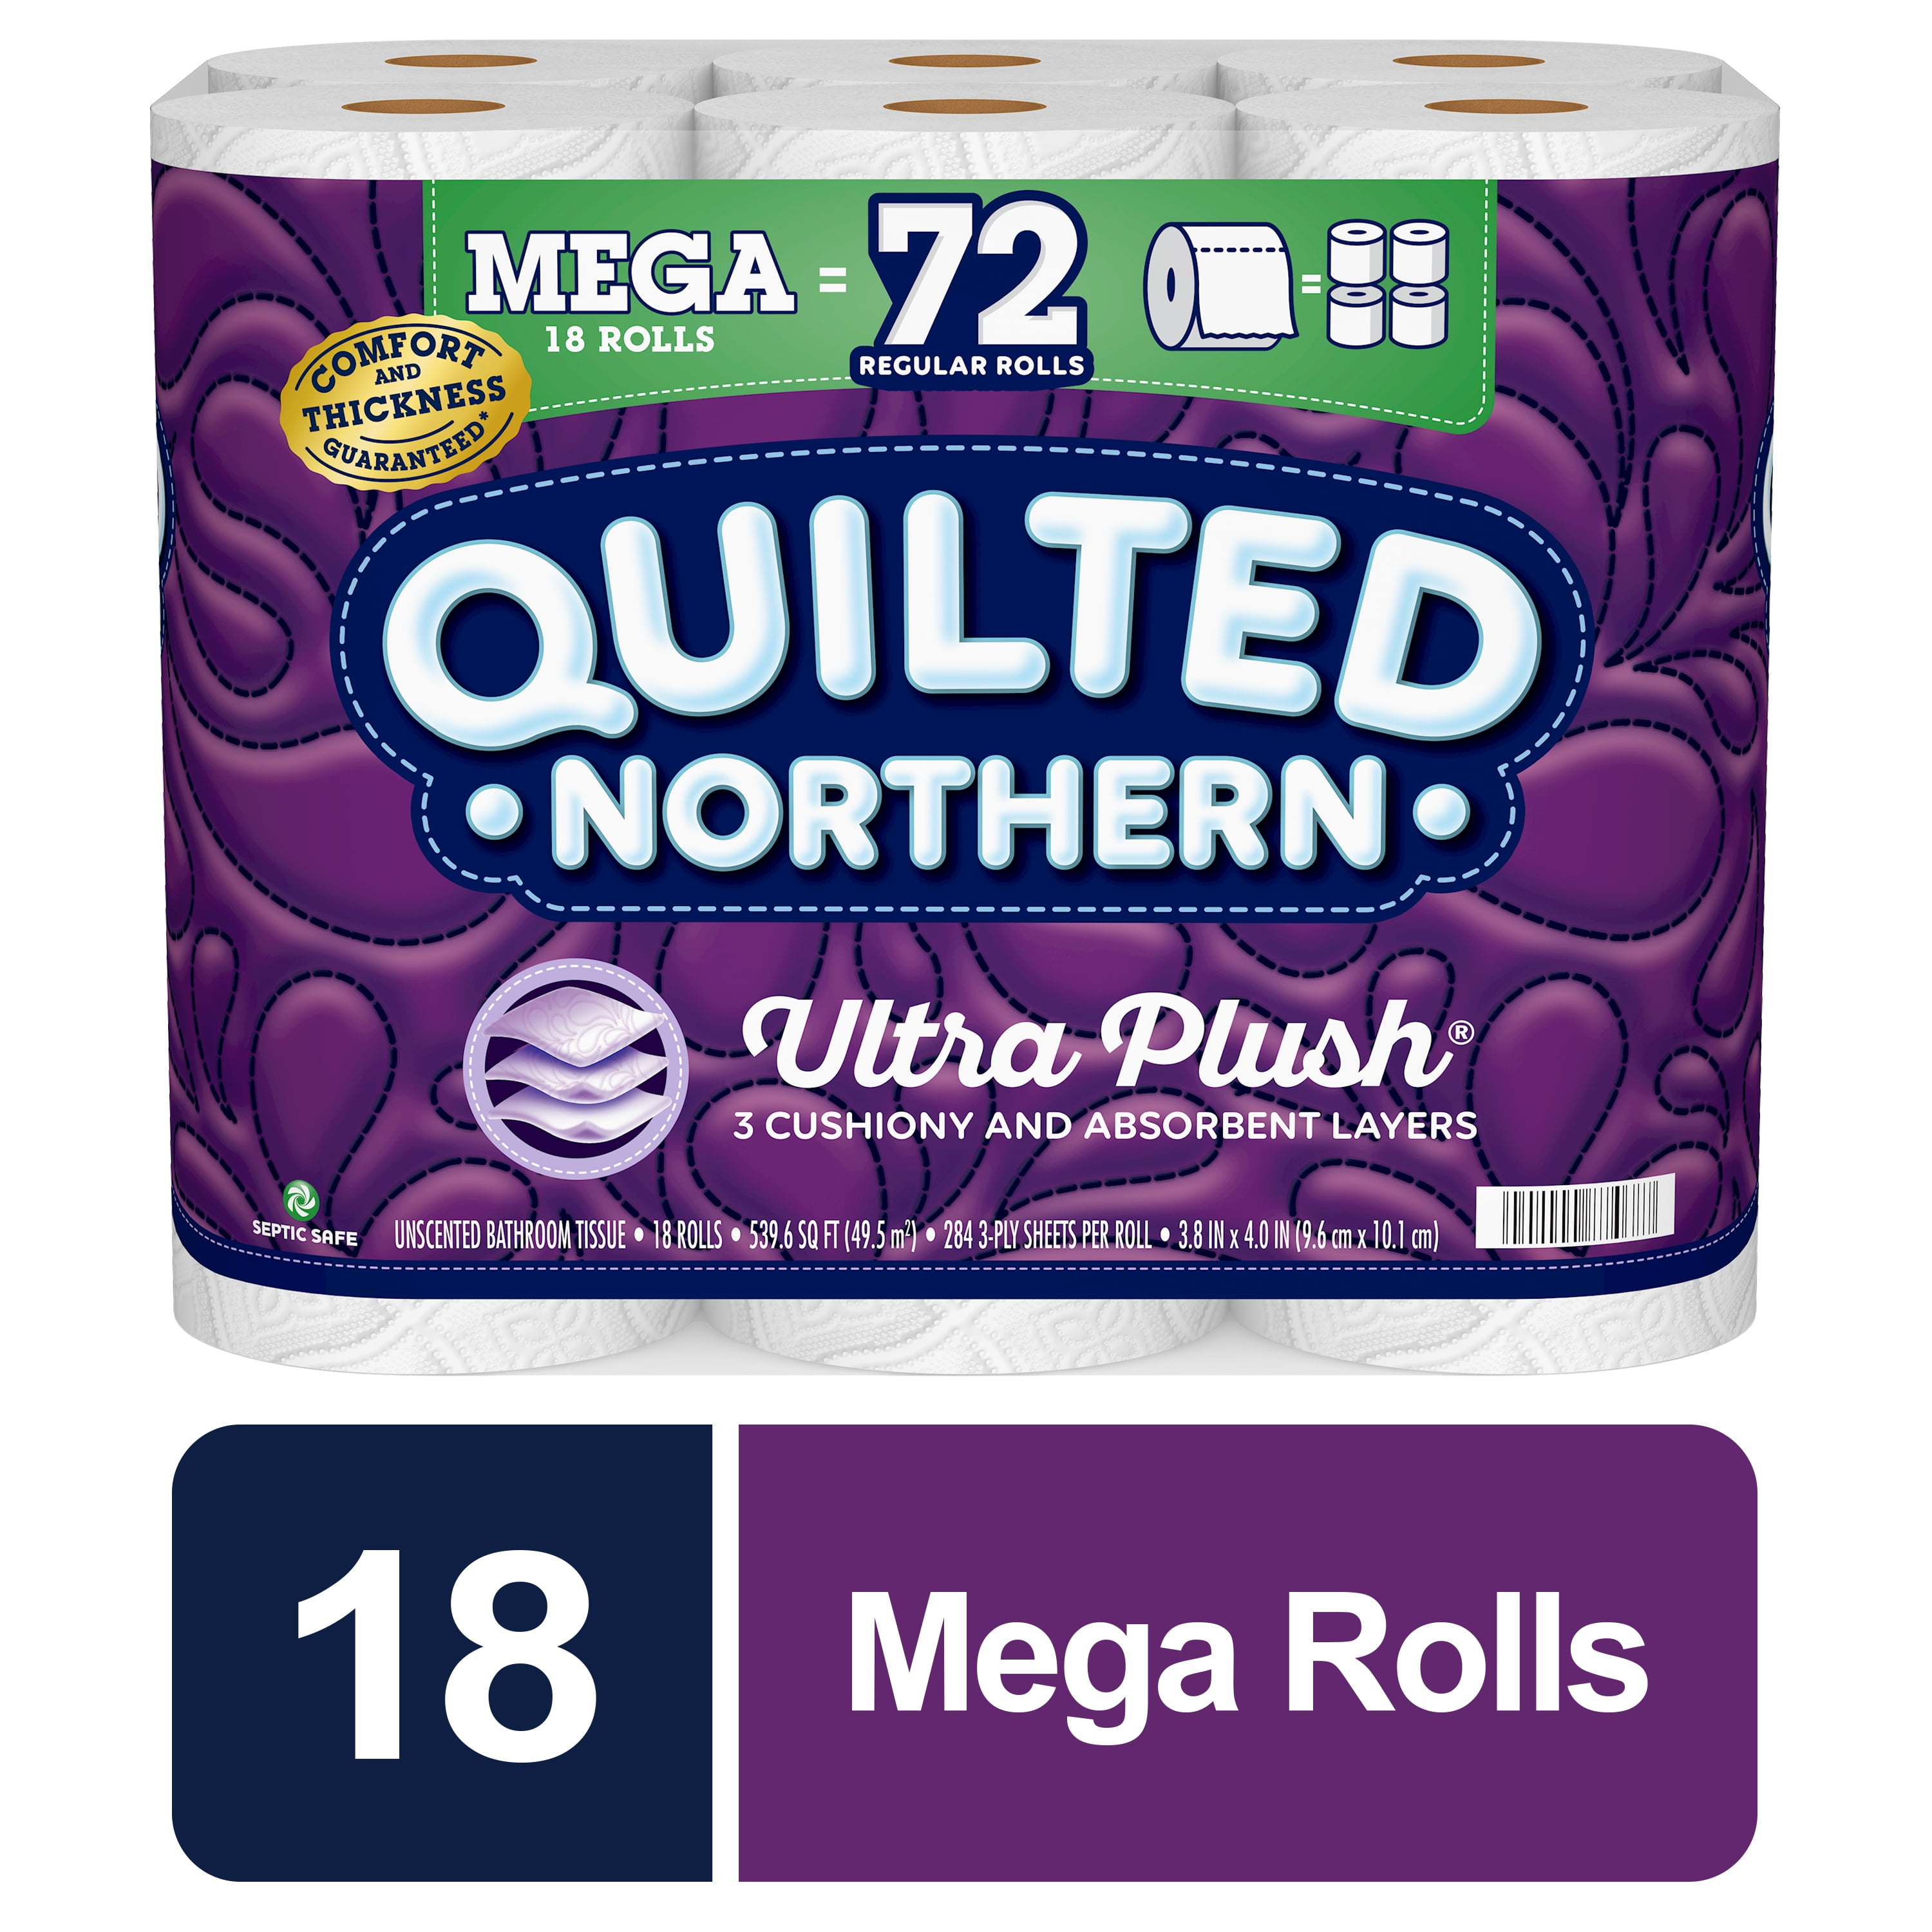 Details about   Quilted Northern Ultra Plush Toilet Paper 12 Mega Rolls 2 Pack = 24 Rolls 